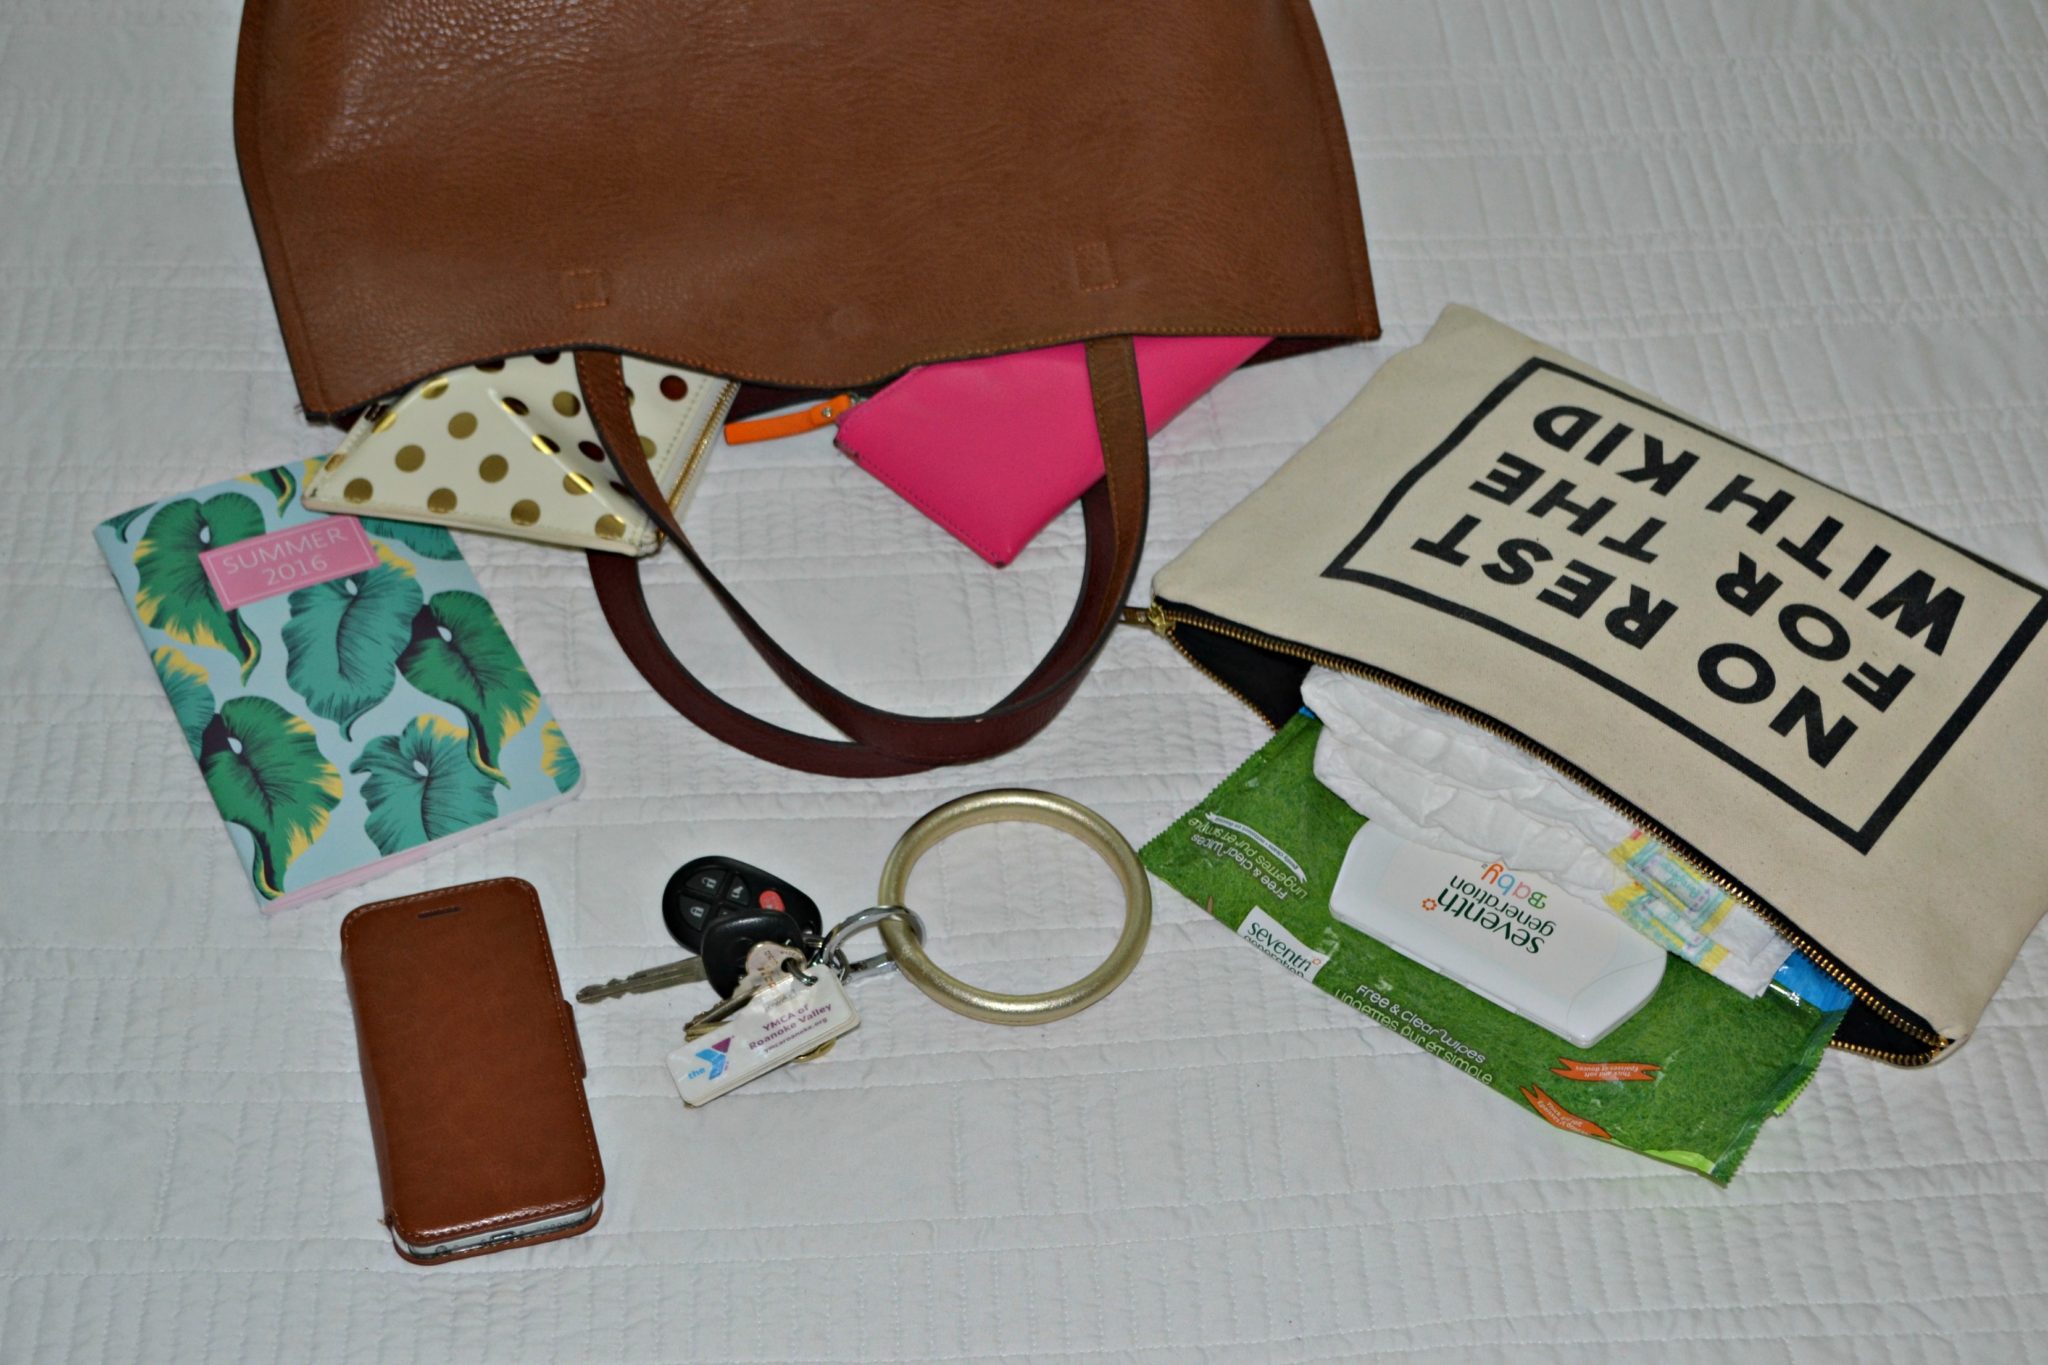 When I'm Tired of Wearing a Purse, I Turn to These Handy Key Pouches -  PurseBlog